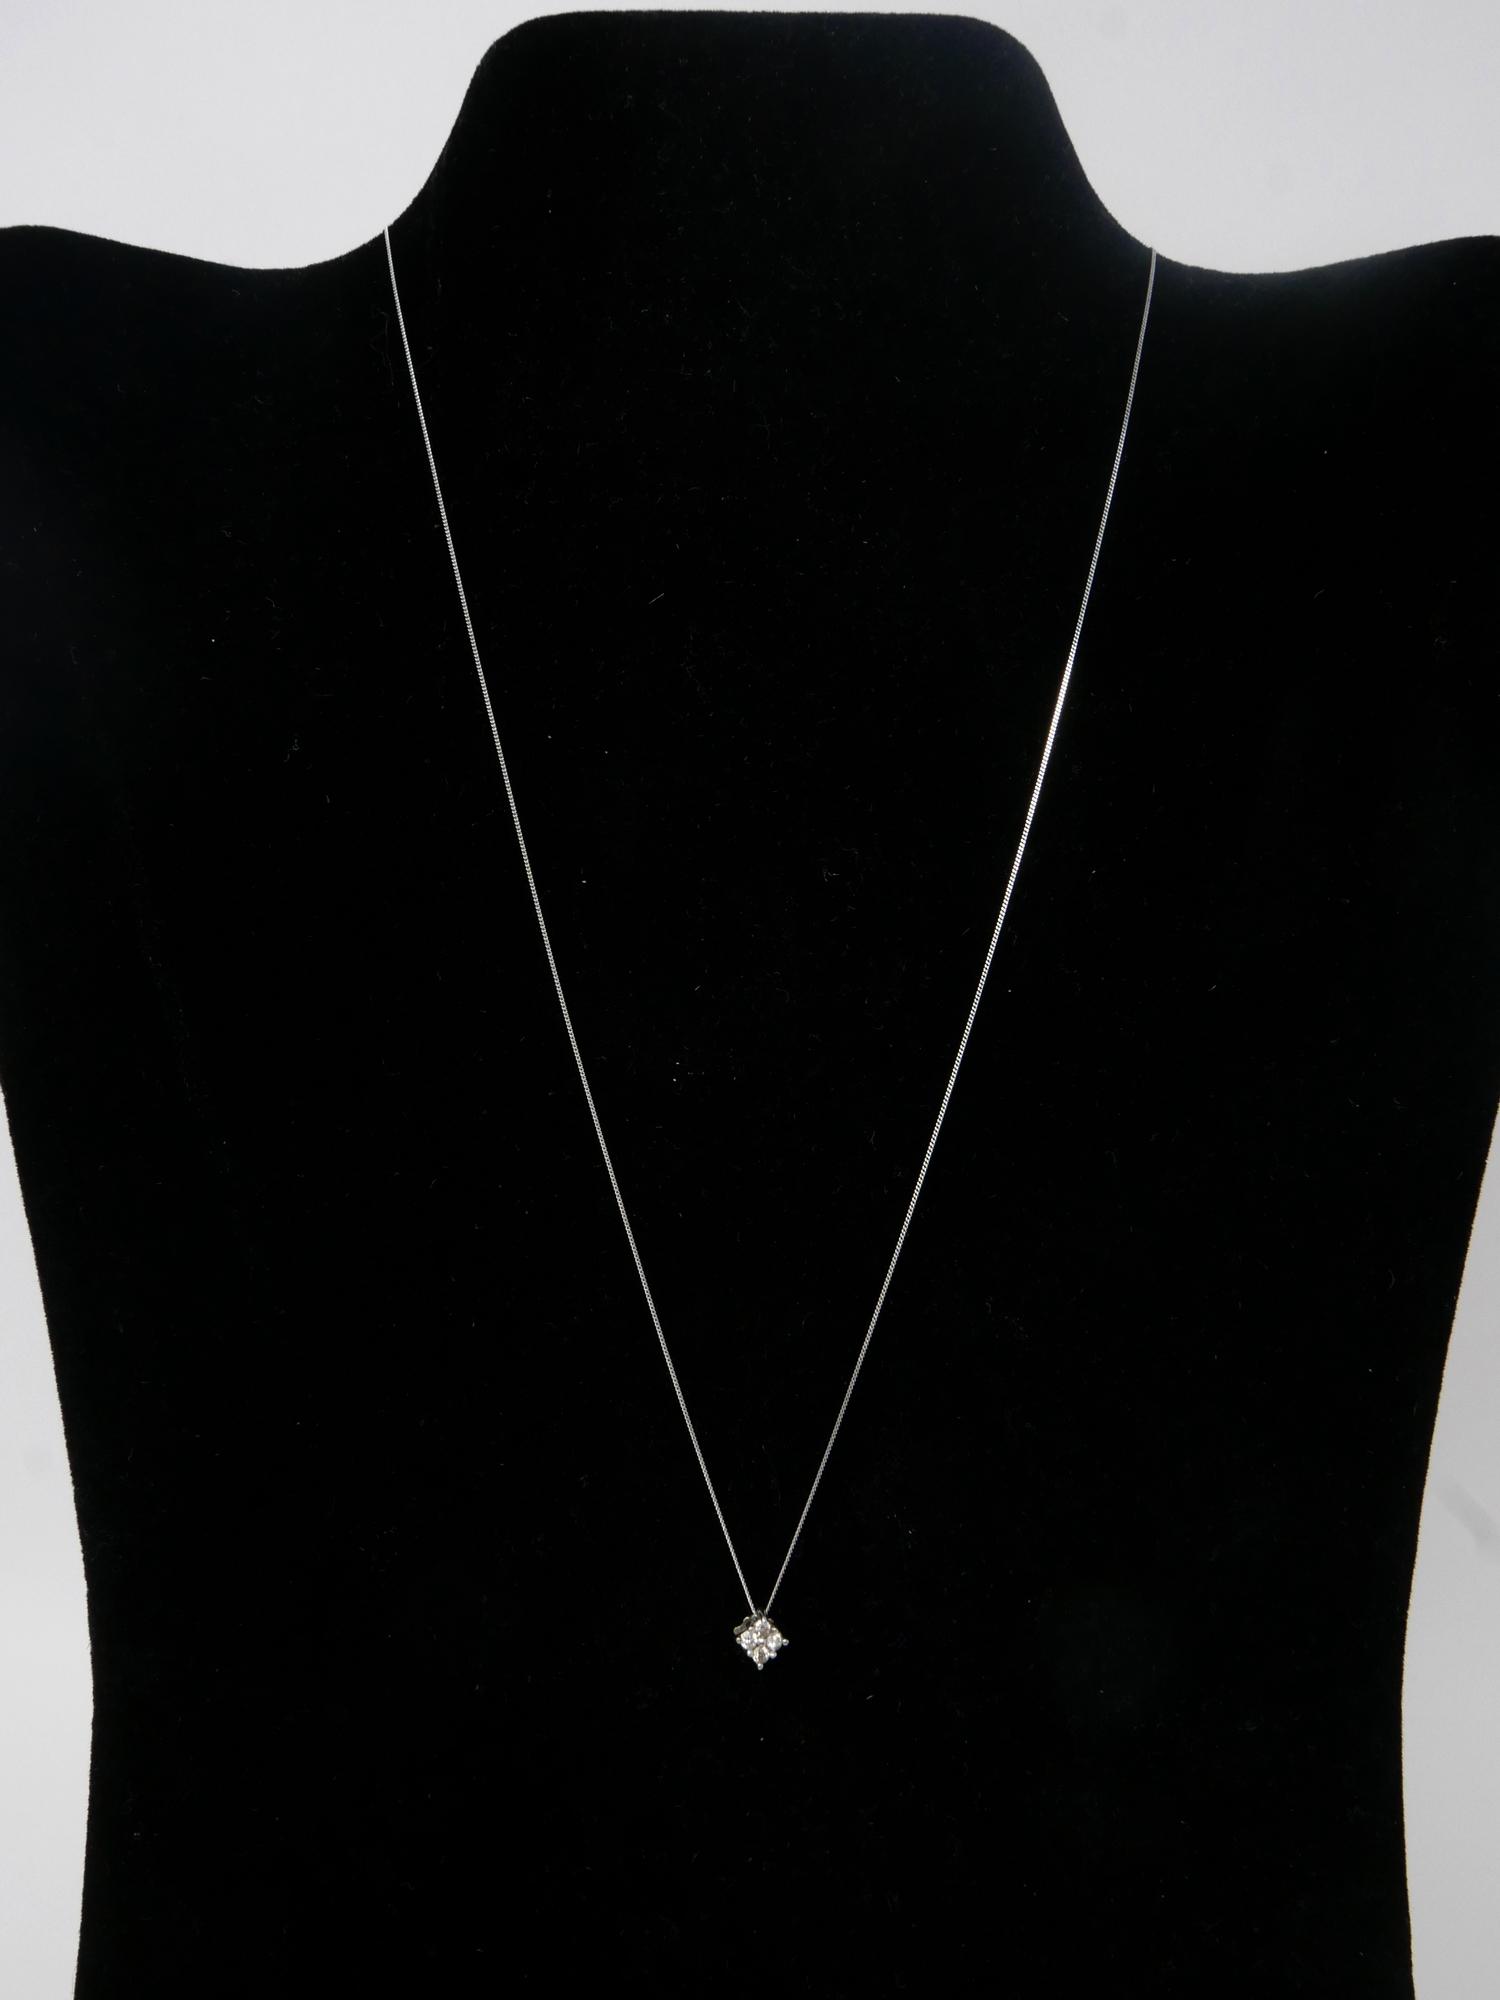 A 10ct white gold and diamond pendant set with 4 stones on white gold chain, in box, 1 gram - Image 2 of 2